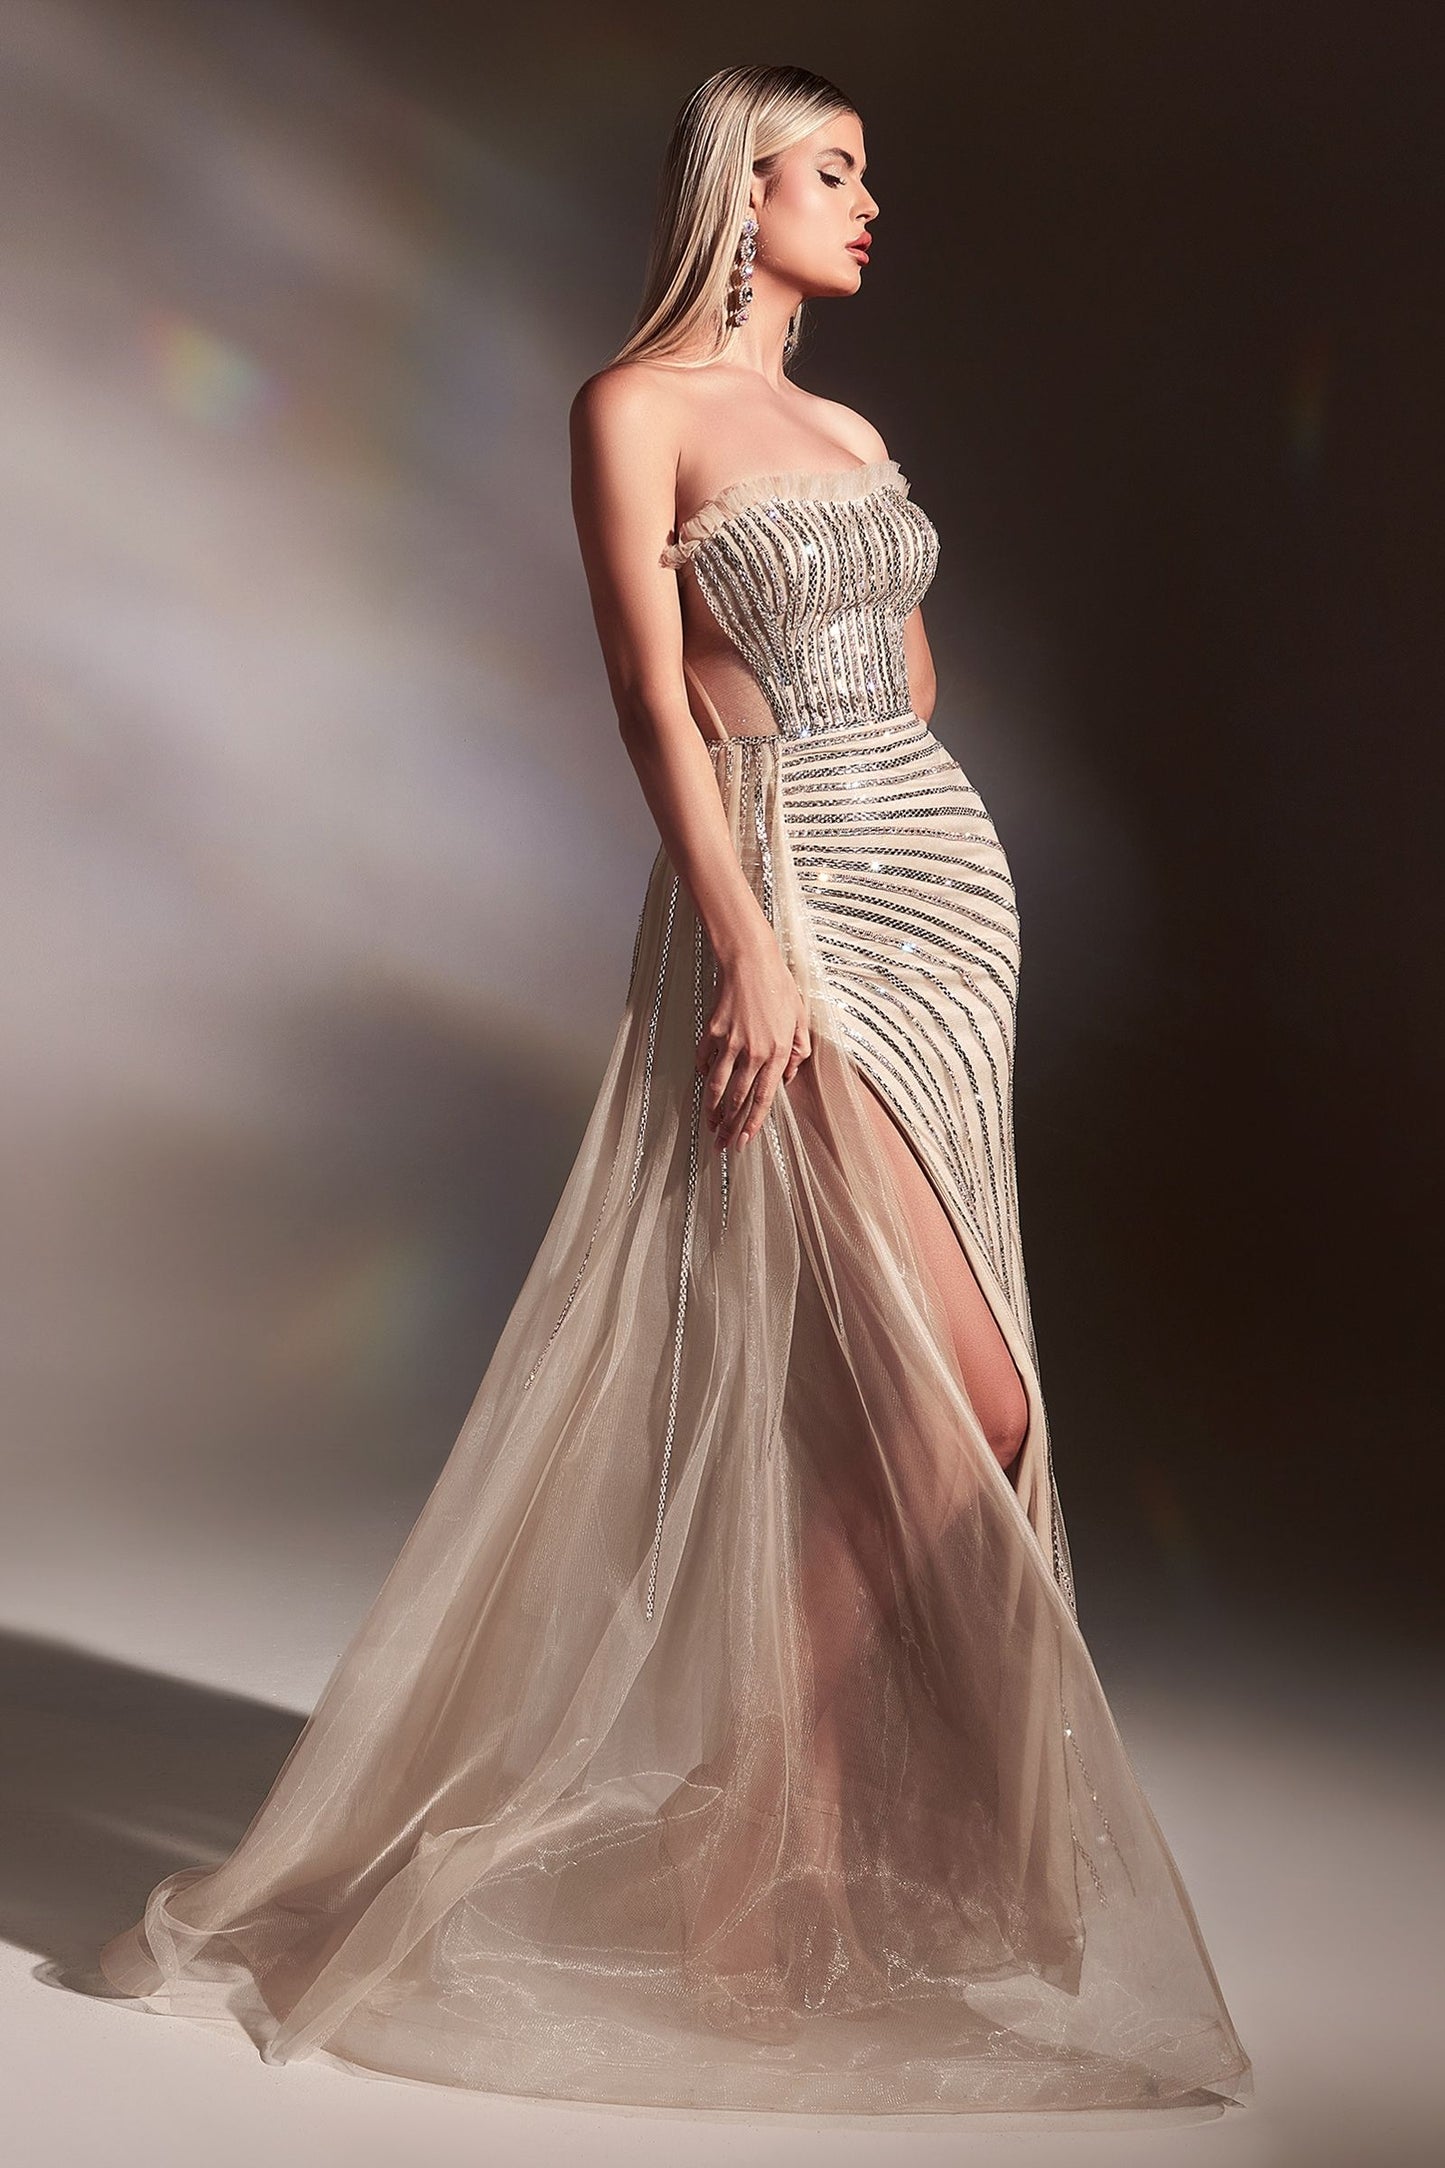 CD991
FITTED NUDE GOWN WITH RIGHT SIDE OVERSKIRT AND RHINESTONE DETAILS